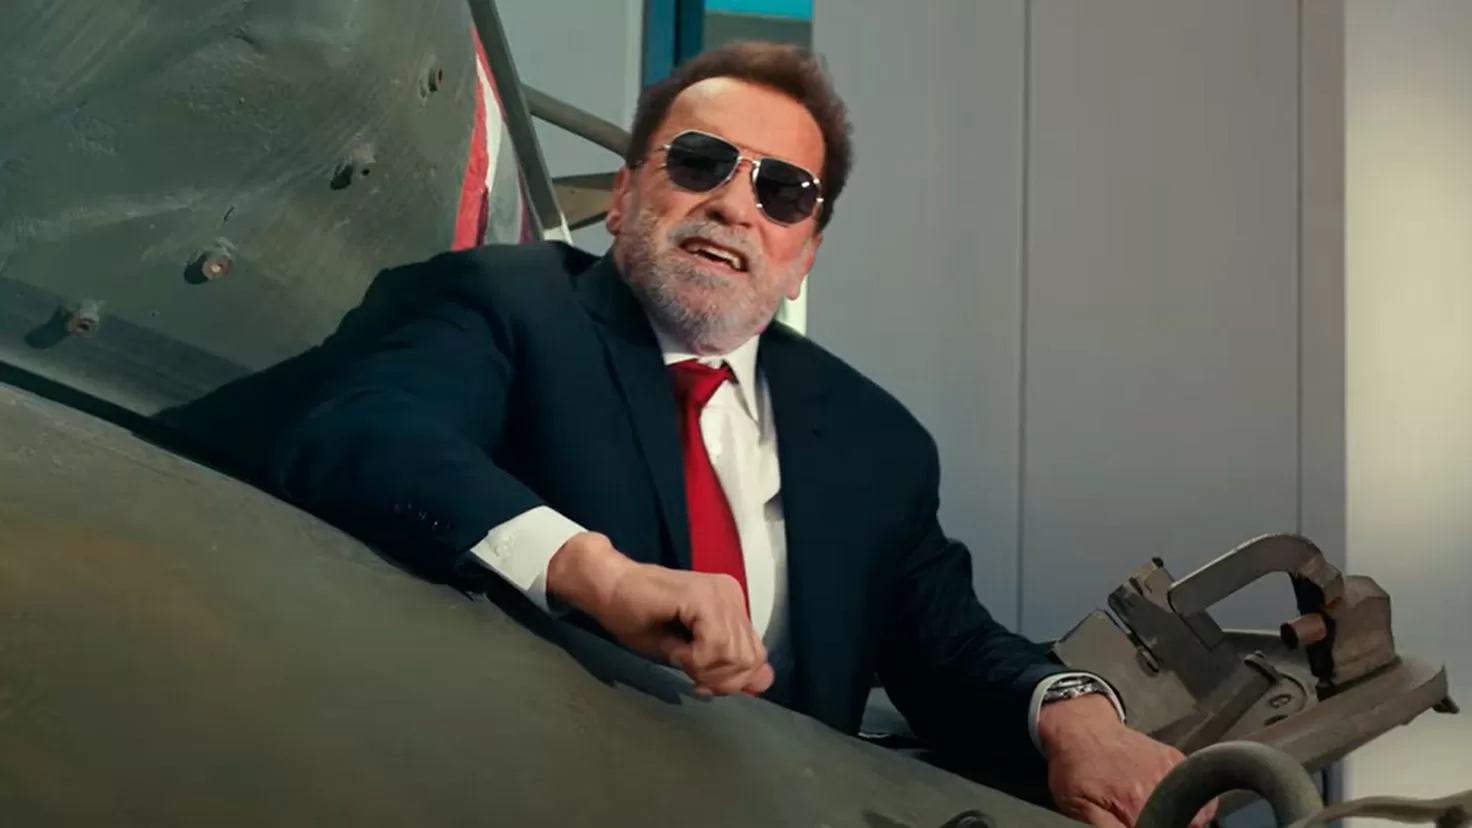 Arnold Schwarzenegger, detained, interrogated and fined at a German airport
